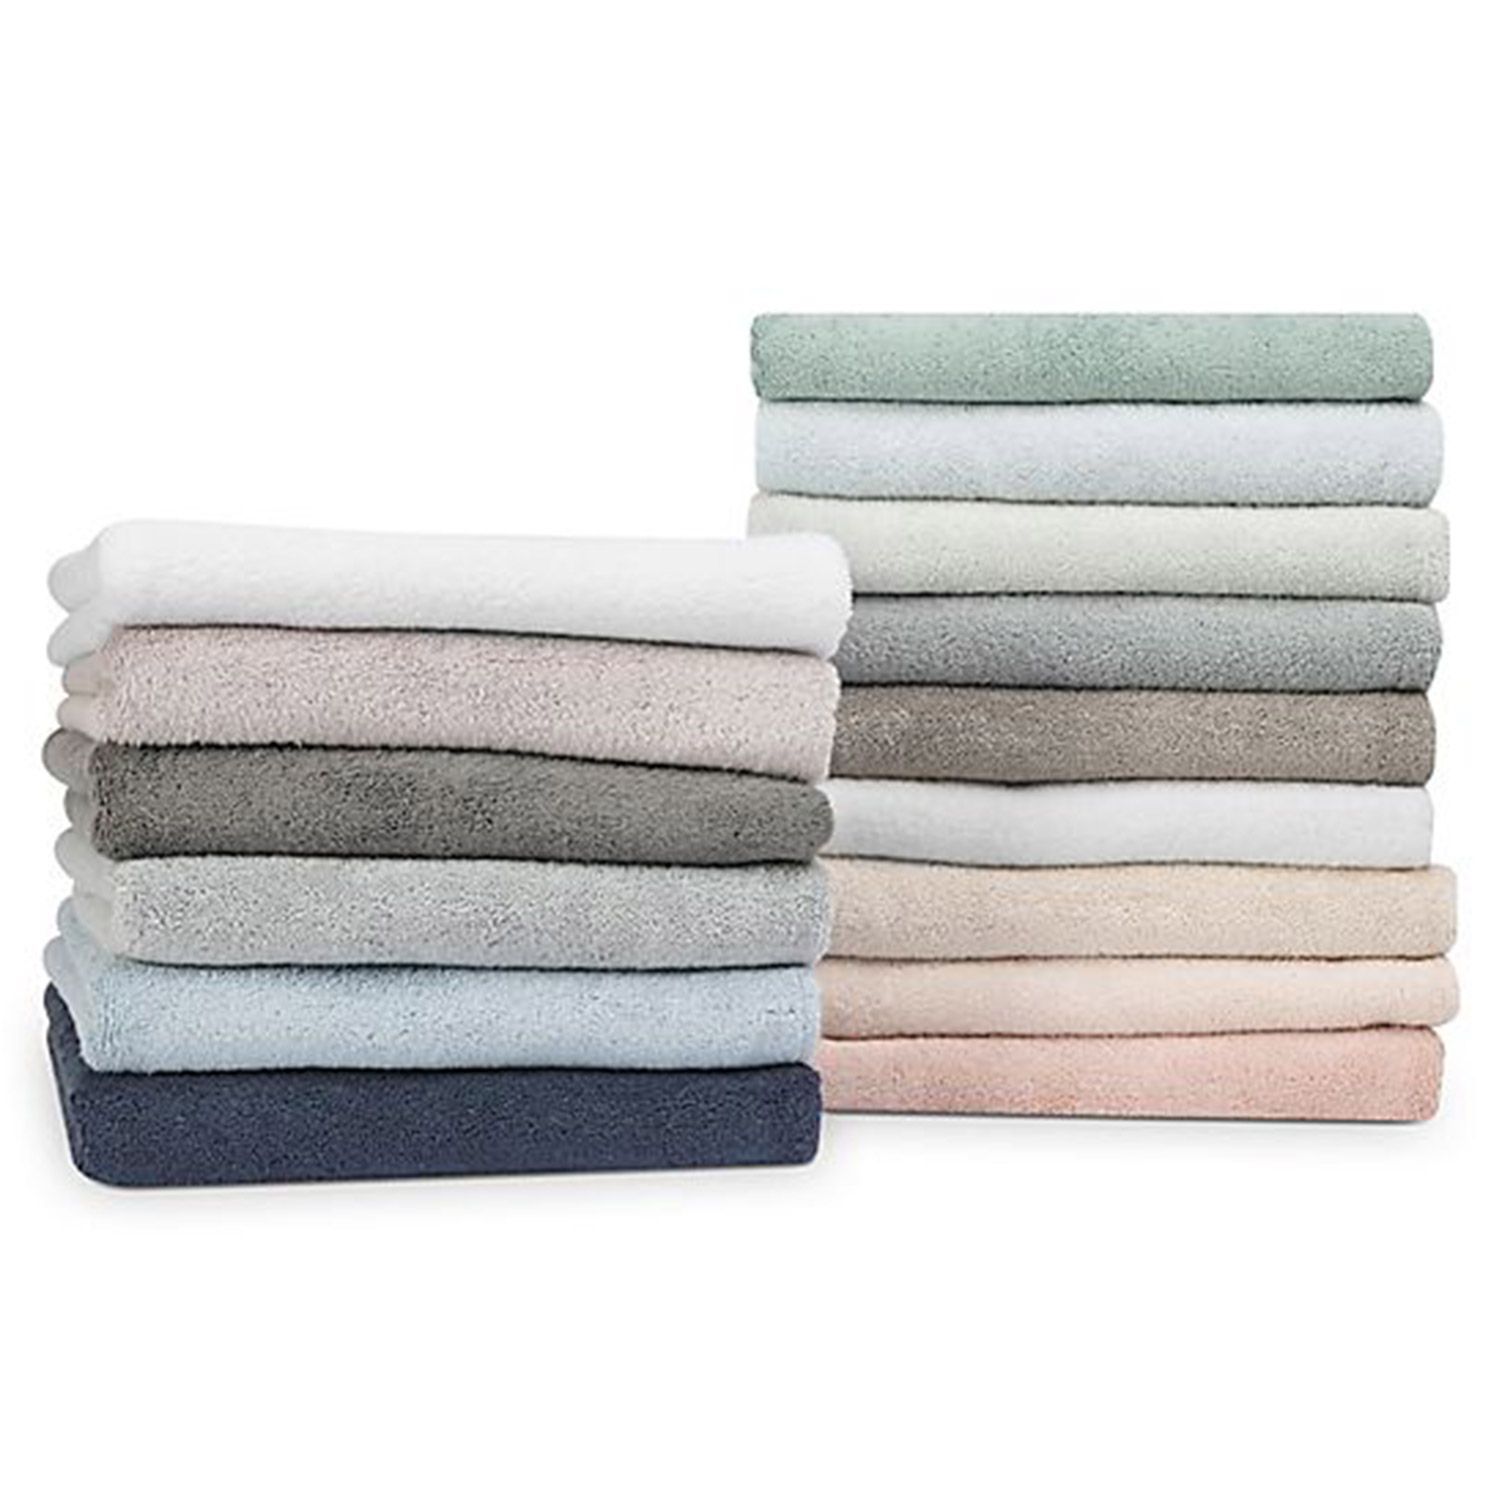 Bath Sheet vs Bath Towel: What is the Difference?